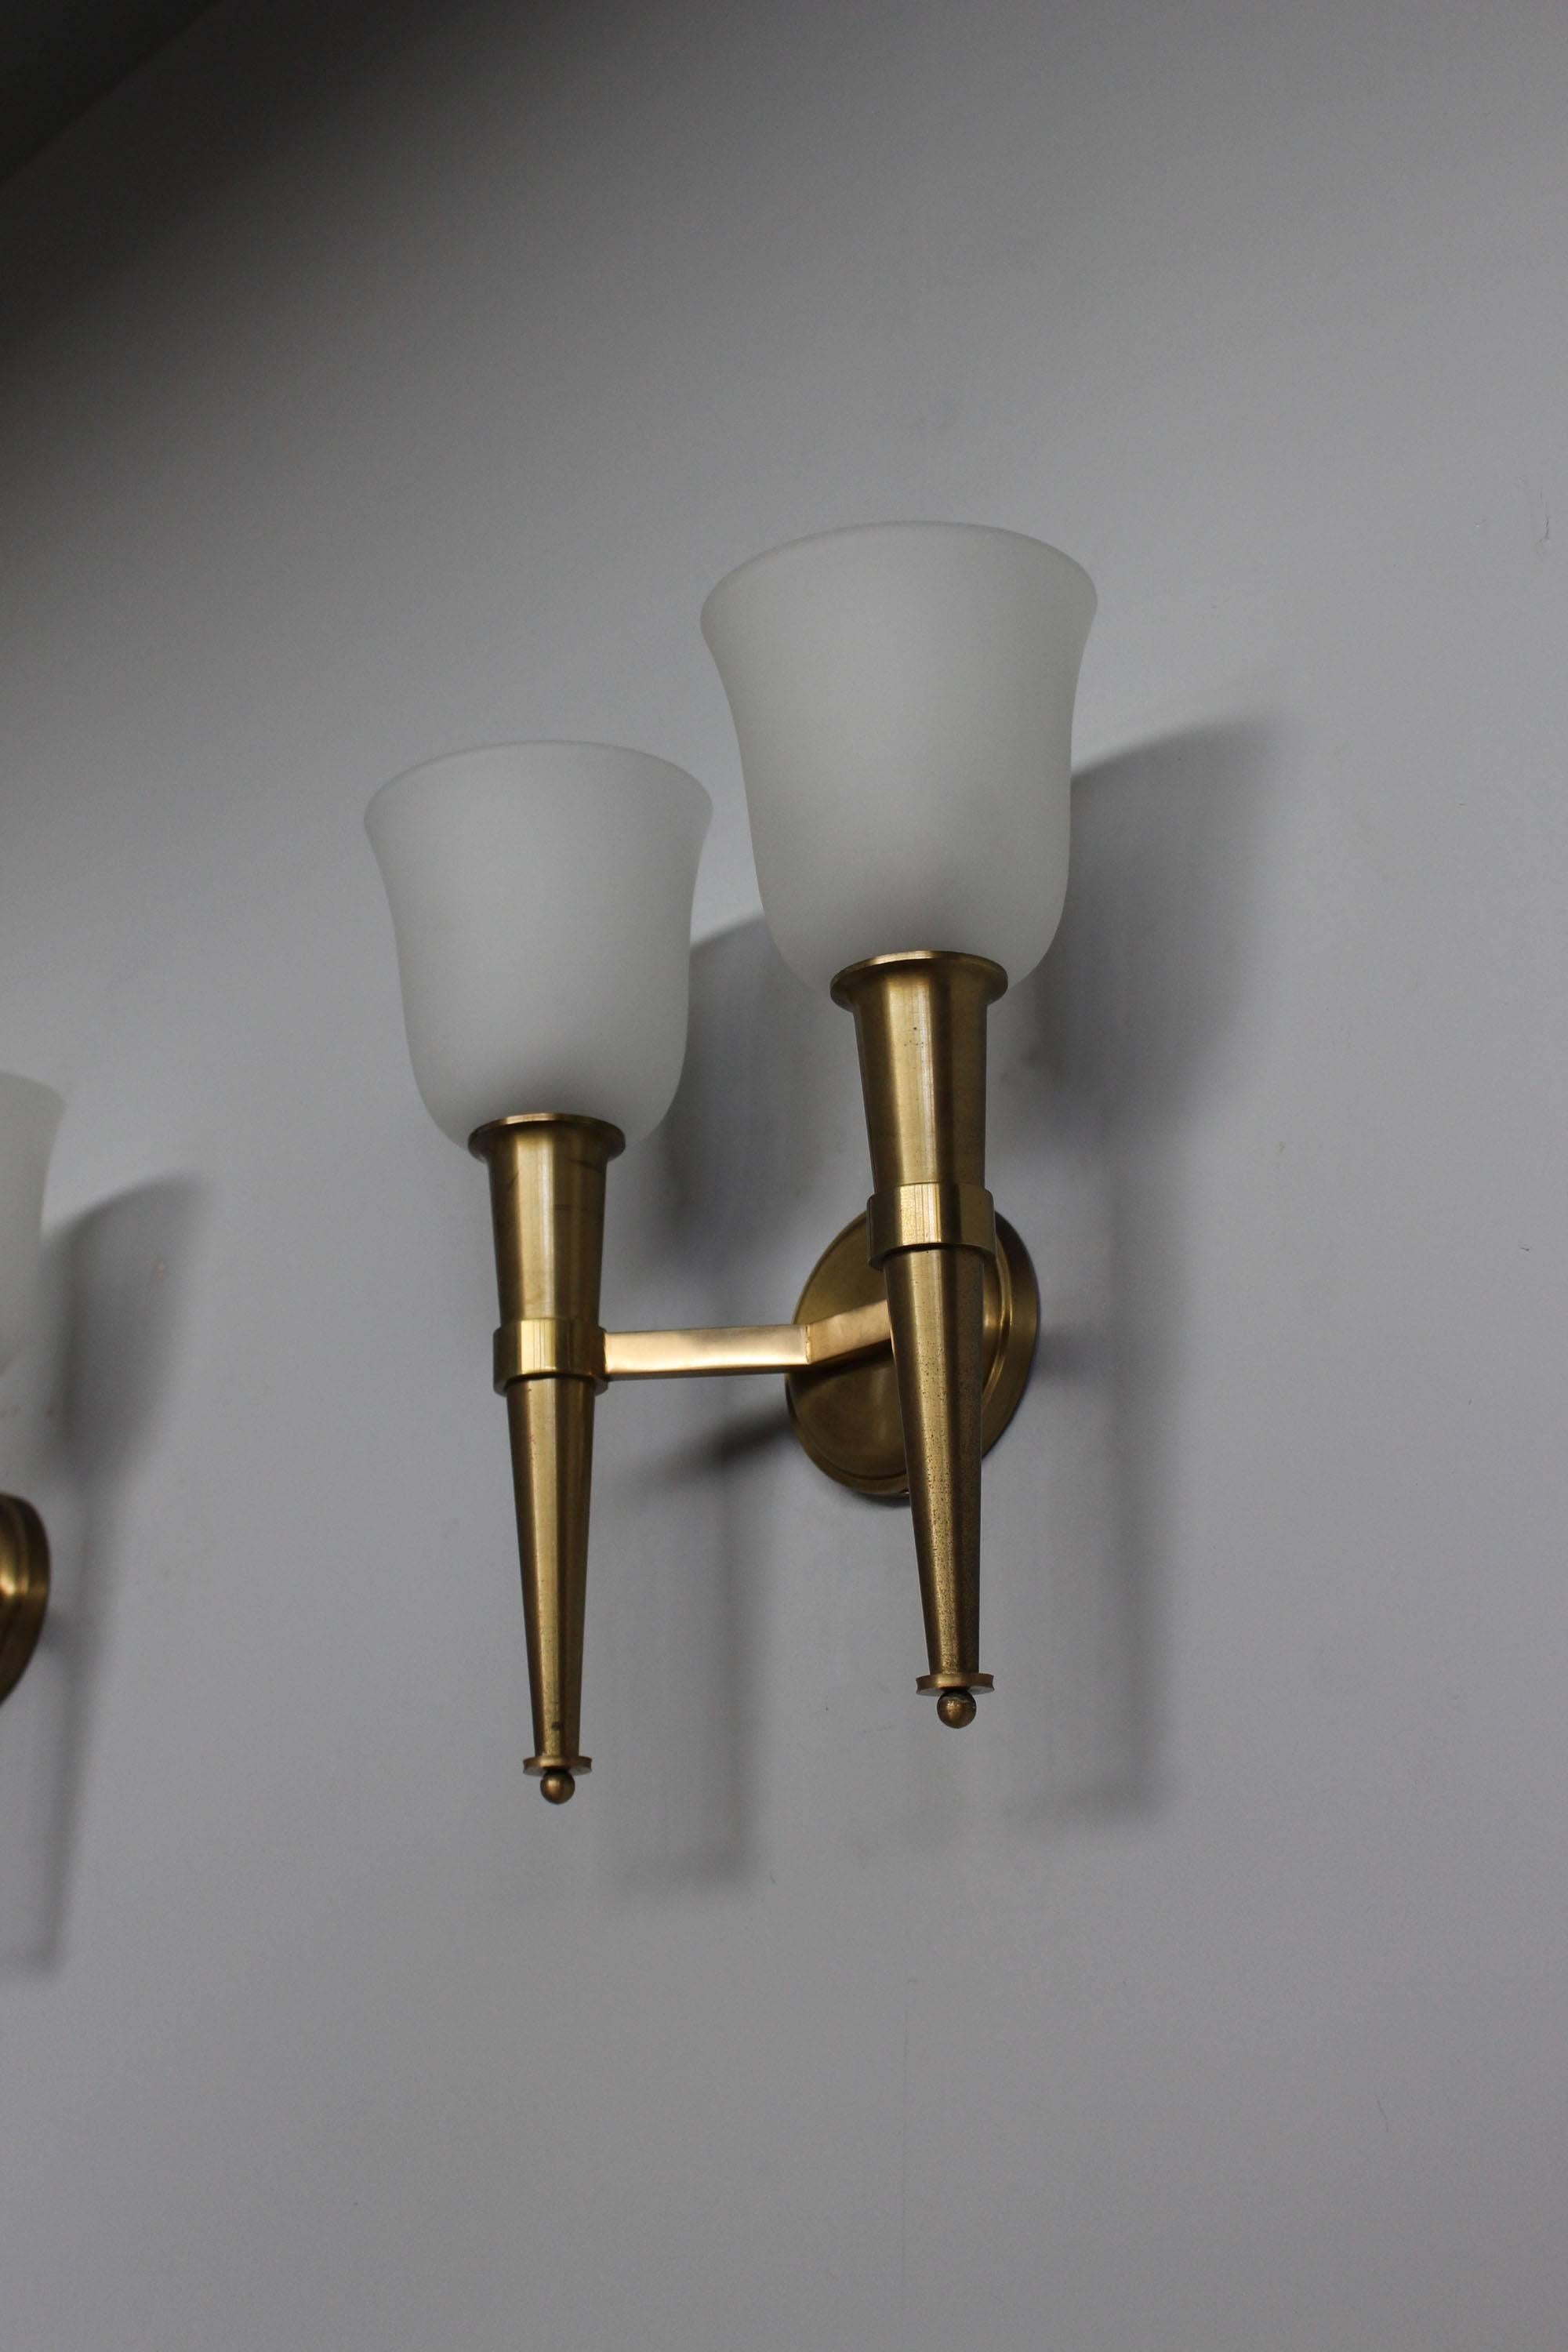 Pair of French Art Deco Double Torchere Sconces by Perzel 1